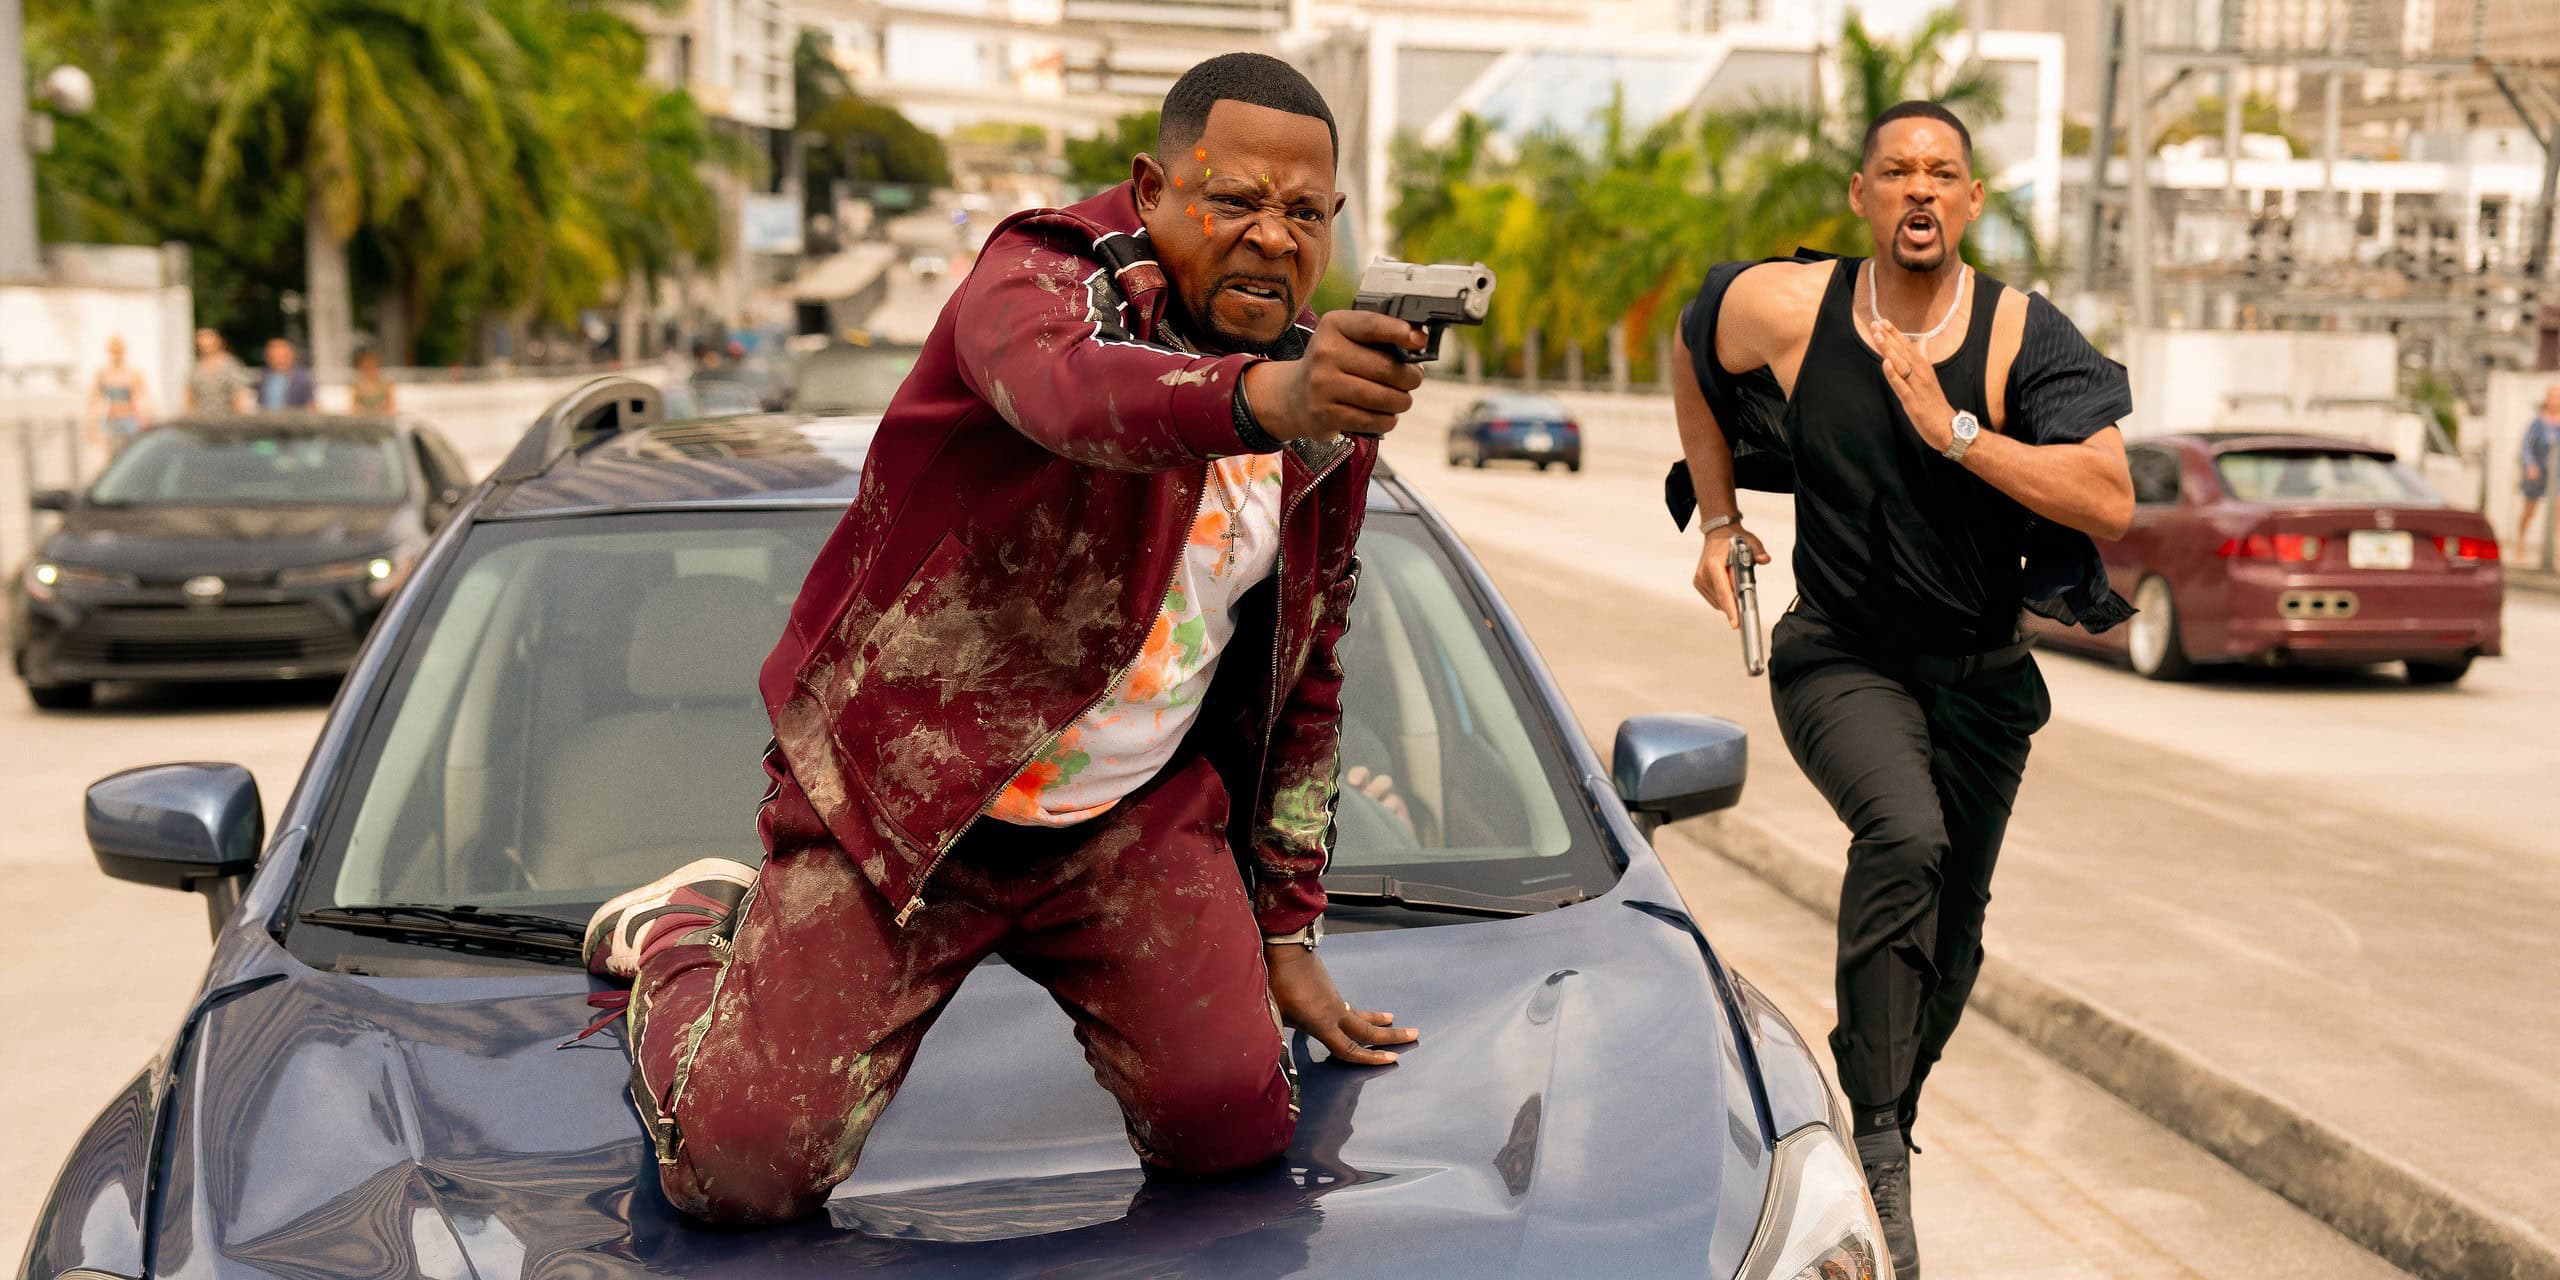 Bad Boys Ride or Die Falls Short of Innovation in Action Comedy